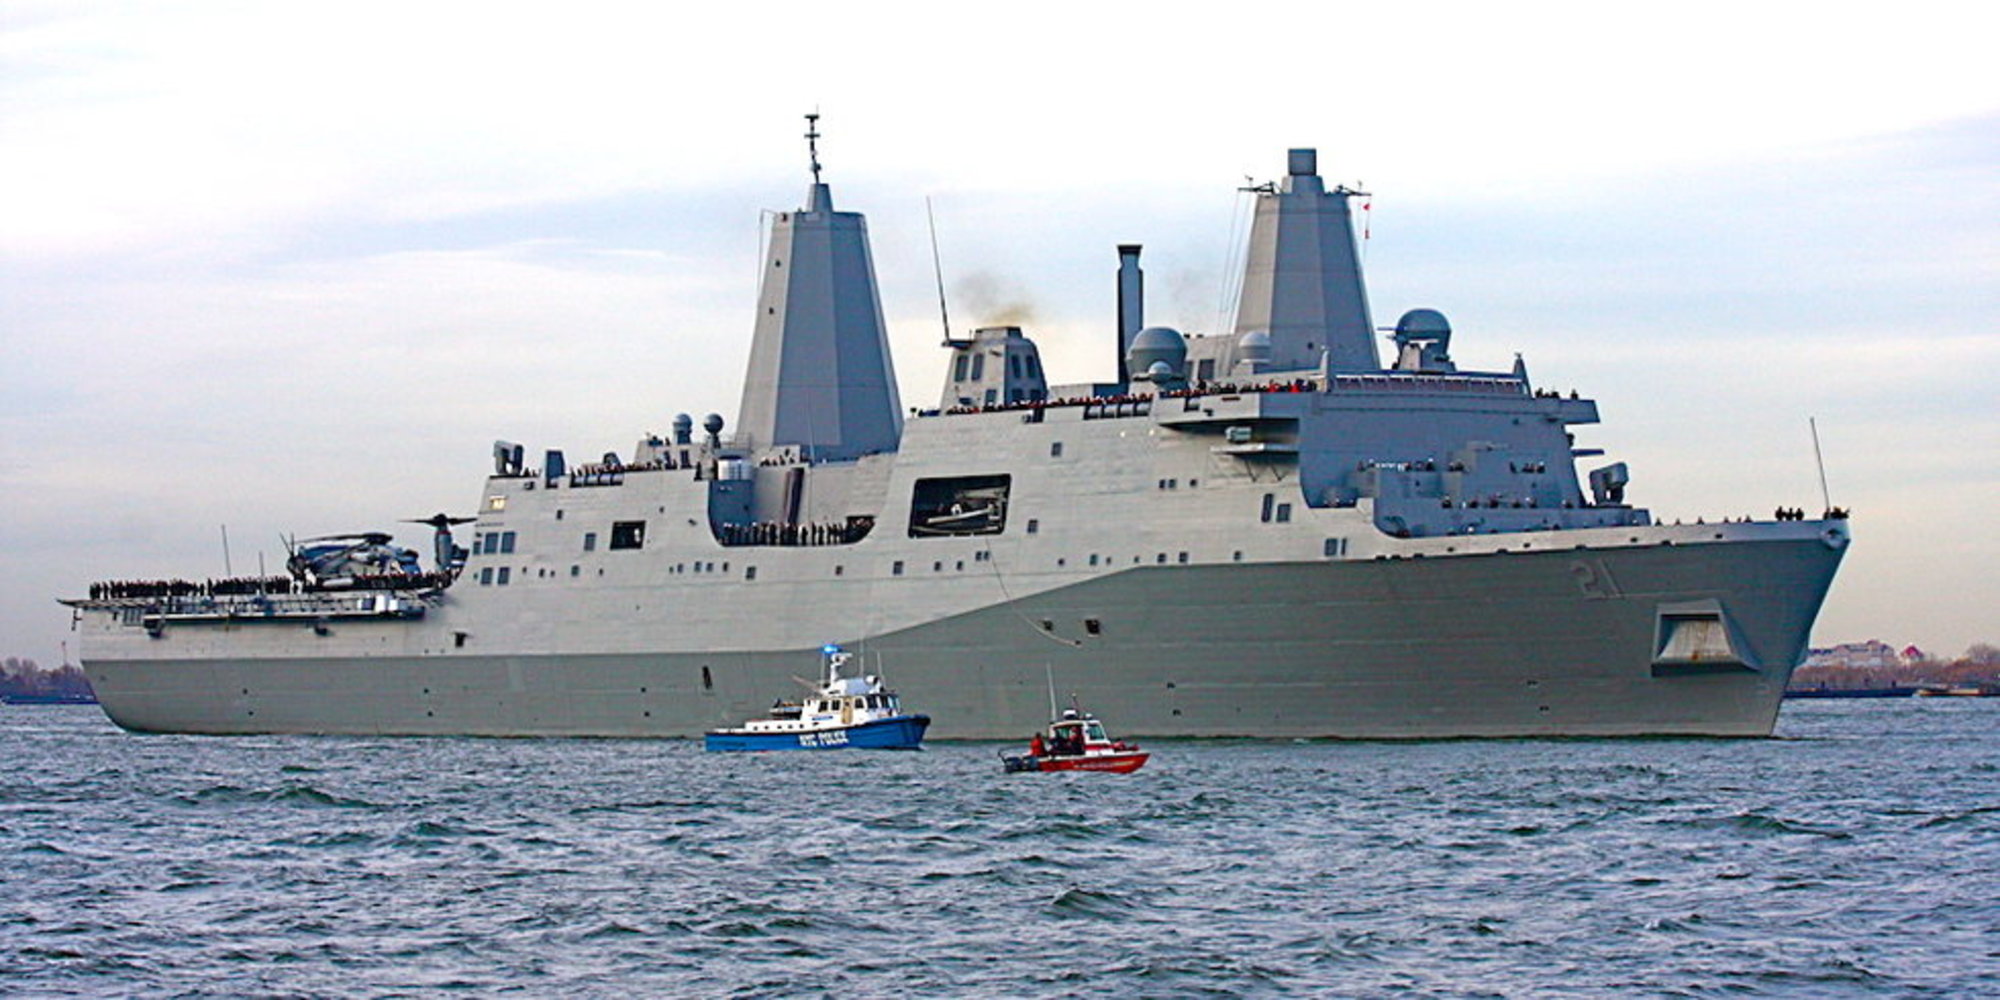 The Navy Vessel Built From Steel From The Wreckage Of The World Trade Center - Task & Purpose